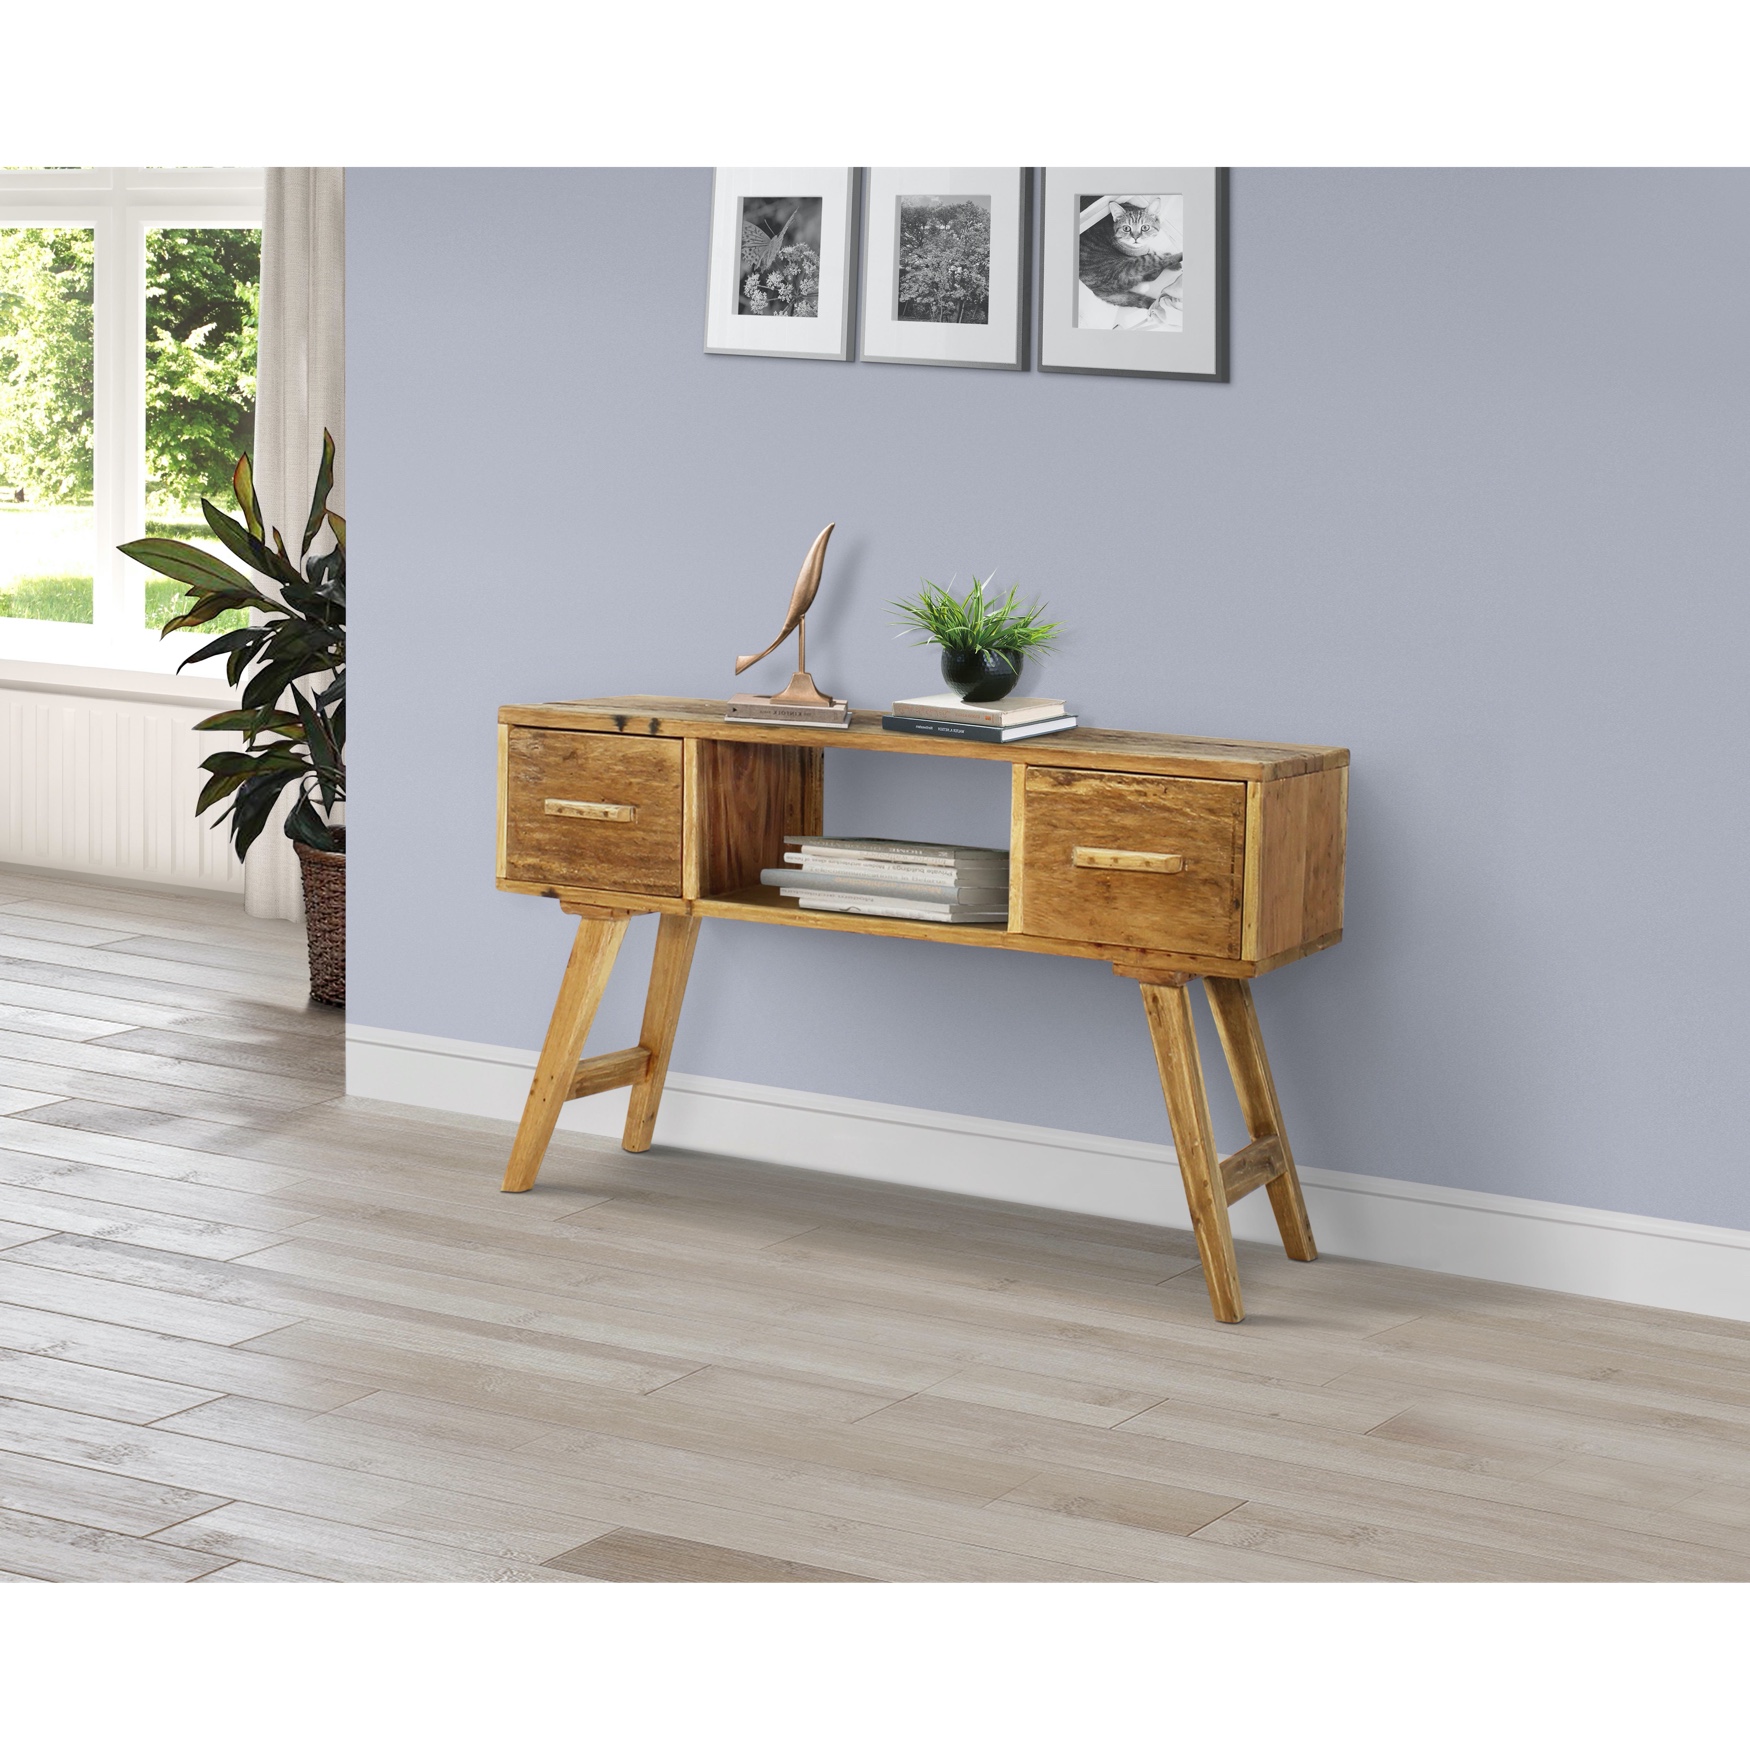 Java Wood TV Cabinet/Entryway Table with Drawers, NATURAL